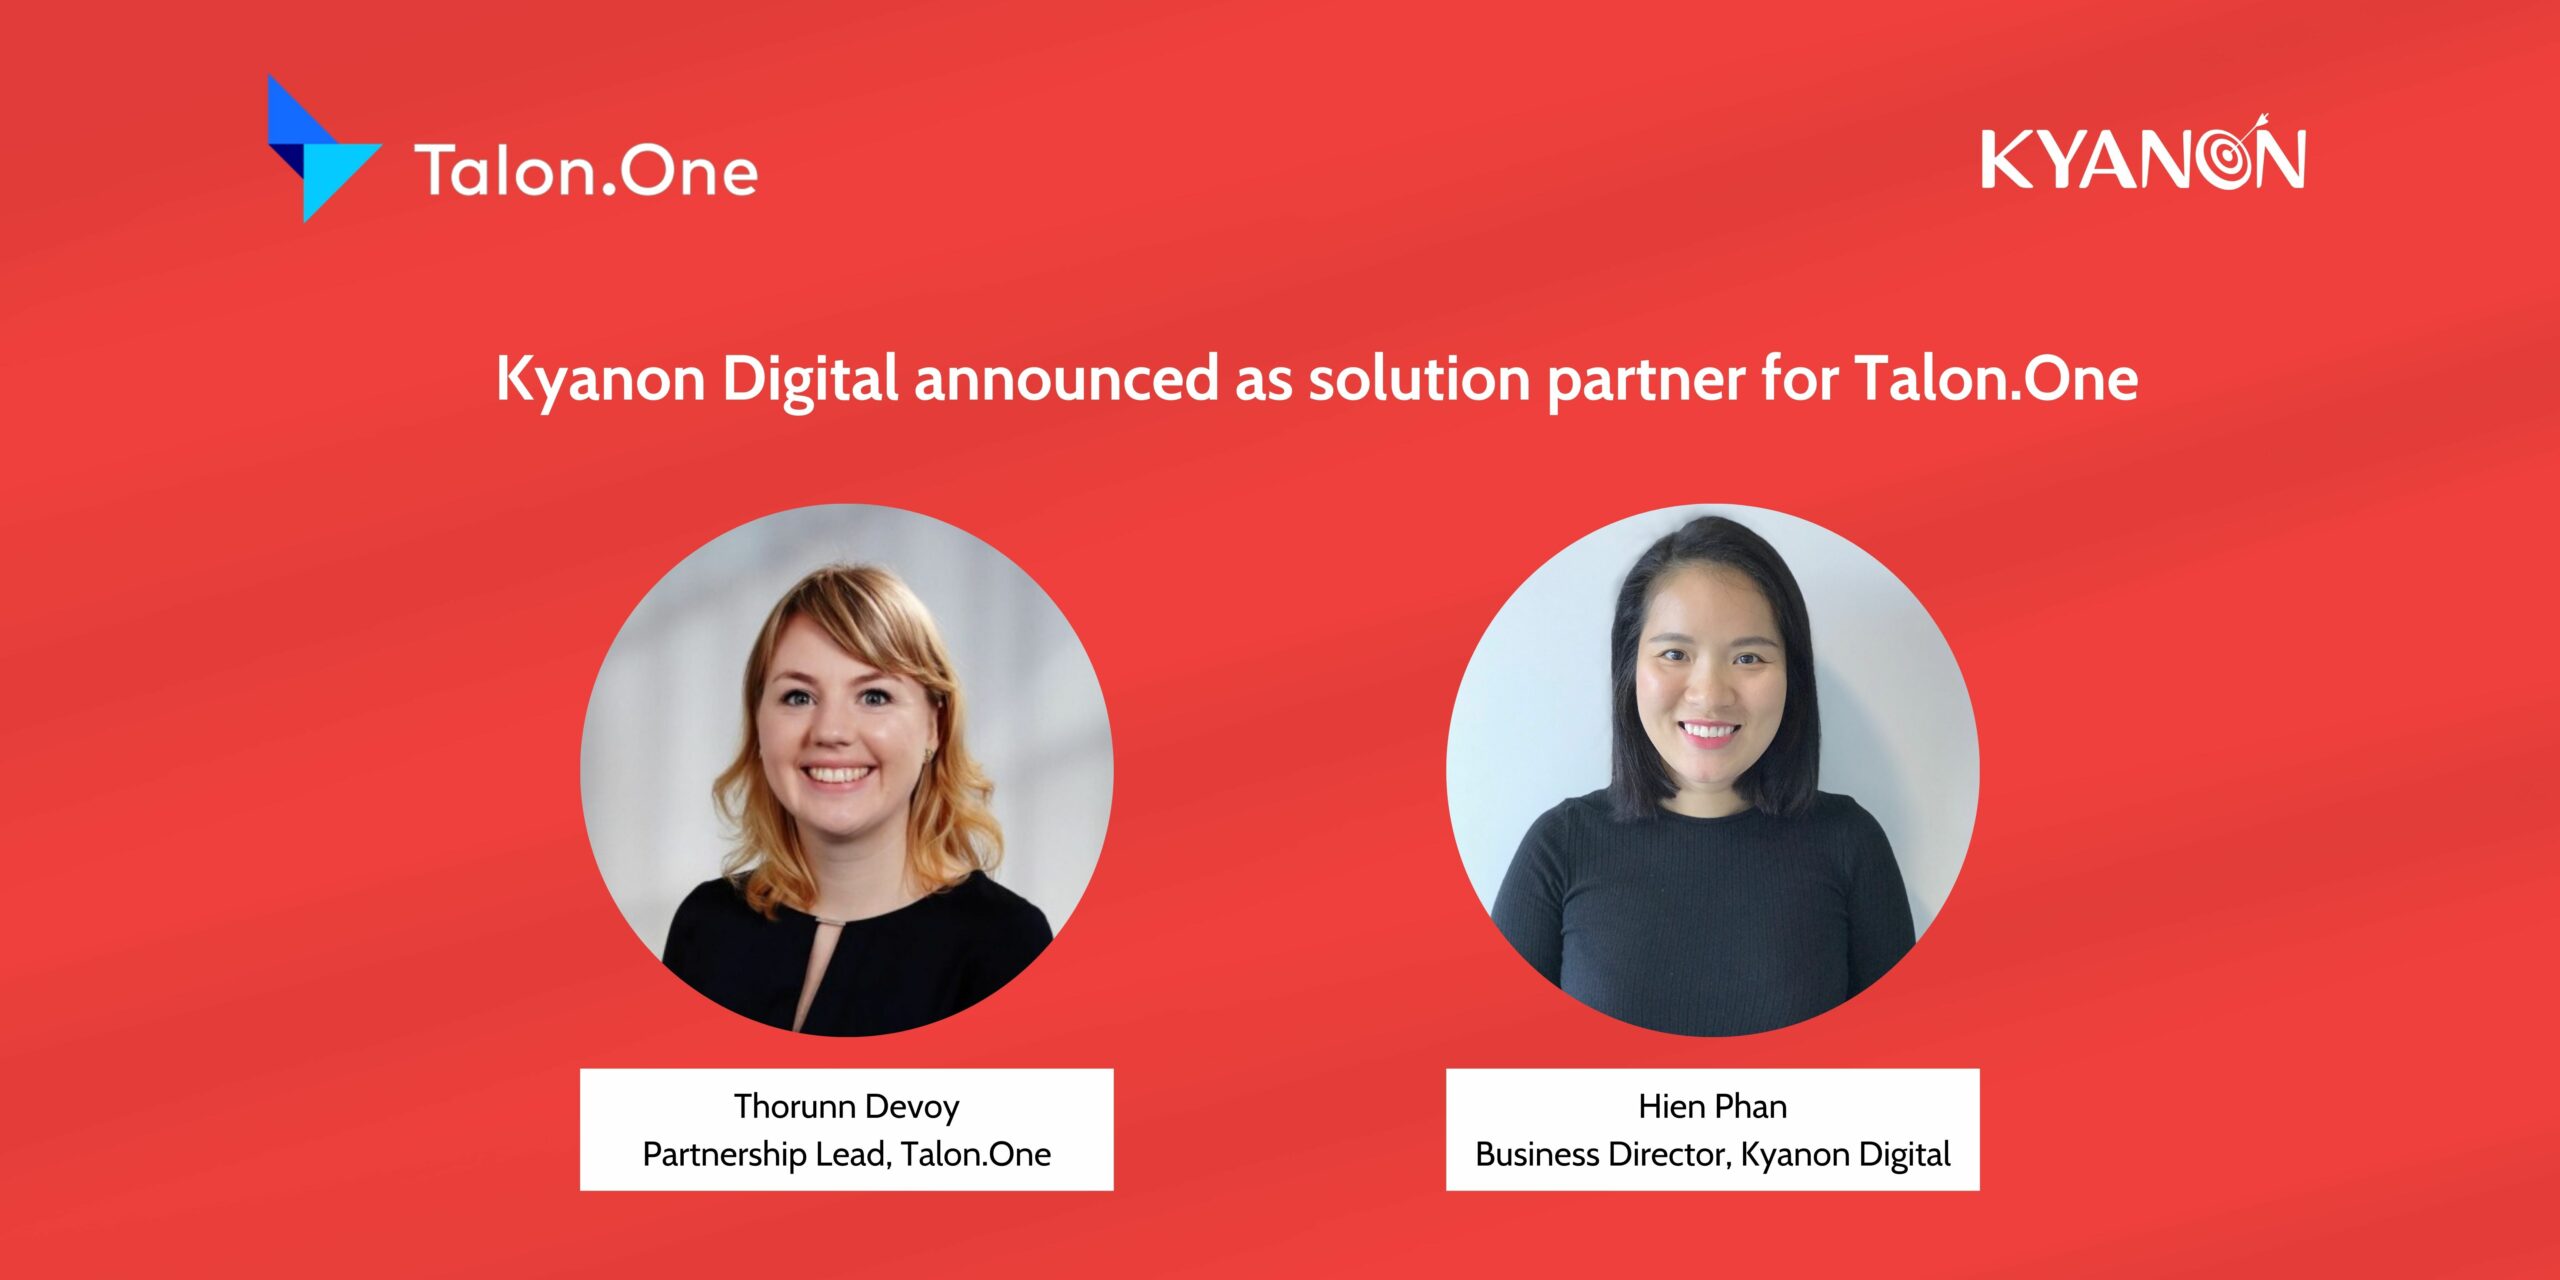 Kyanon Digital Announced As Solution Partner For Talon.One - The World’s Most Powerful Promotion Engine